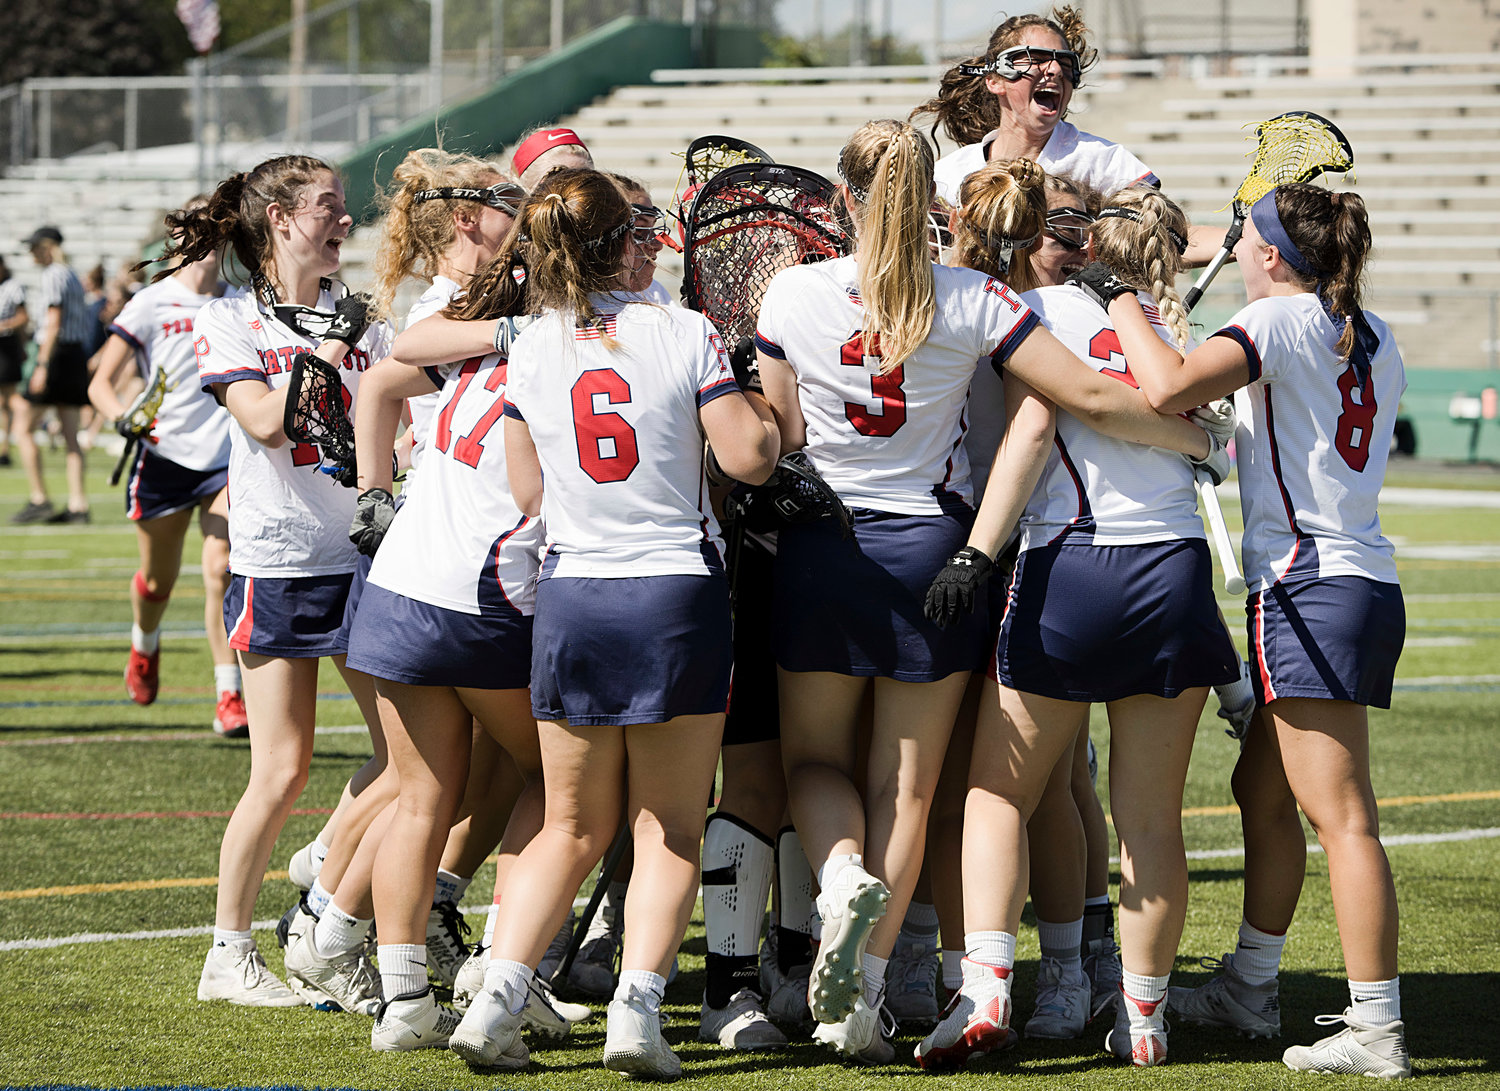 Members of the PHS girls’ lacrosse team storm goalie Emmy O'Connor after beating Burrillville in the Division II final on Sunday at Cranston Stadium.